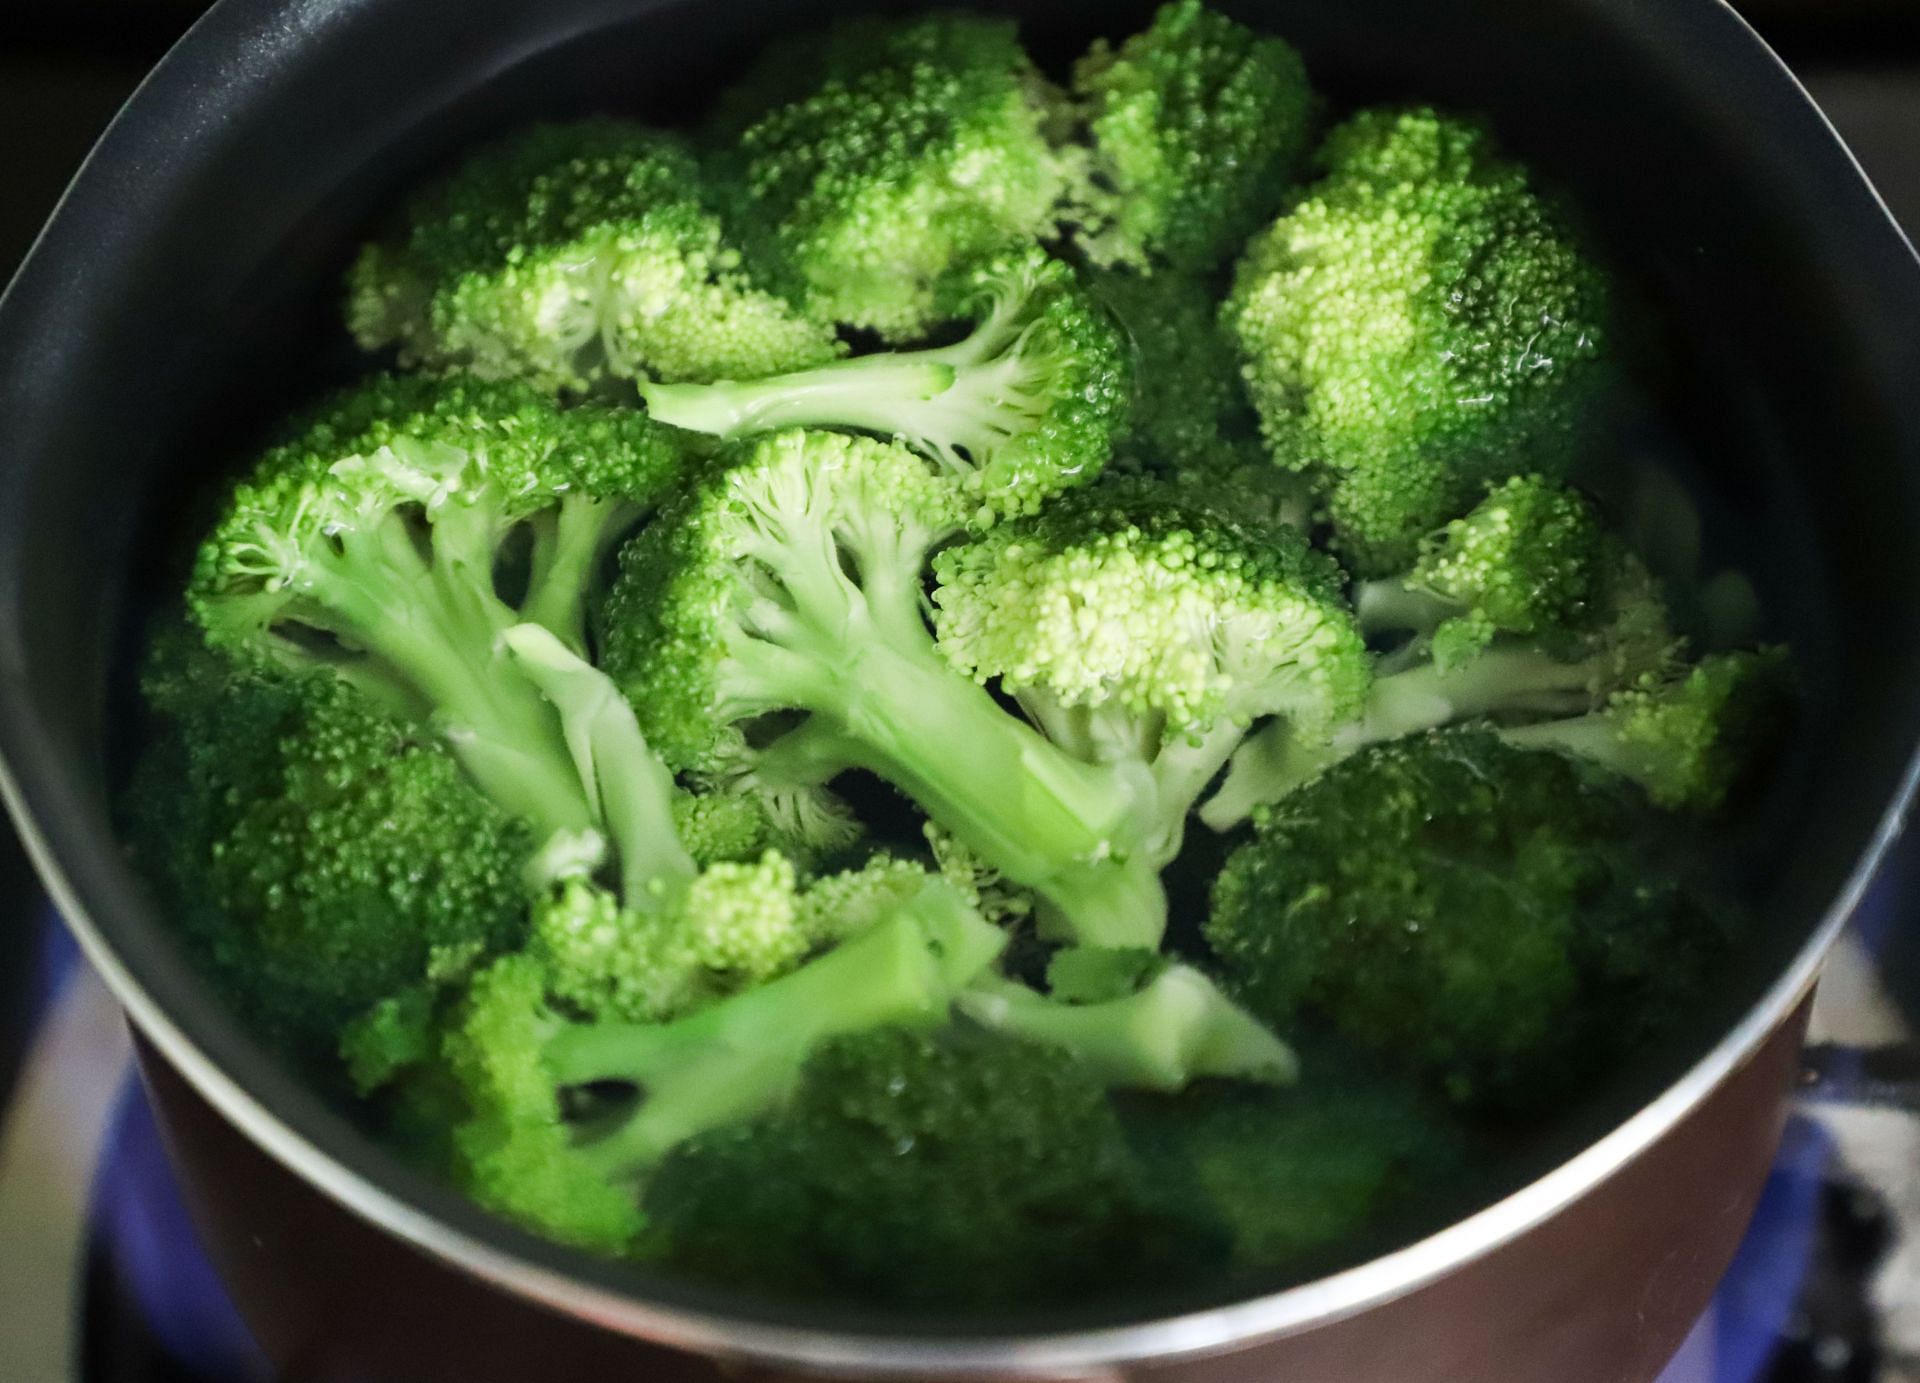 Cruciferous vegetables like broccoli can cause smelly gas because of their nutrient make-up (Image via Pexels/Cats Coming)